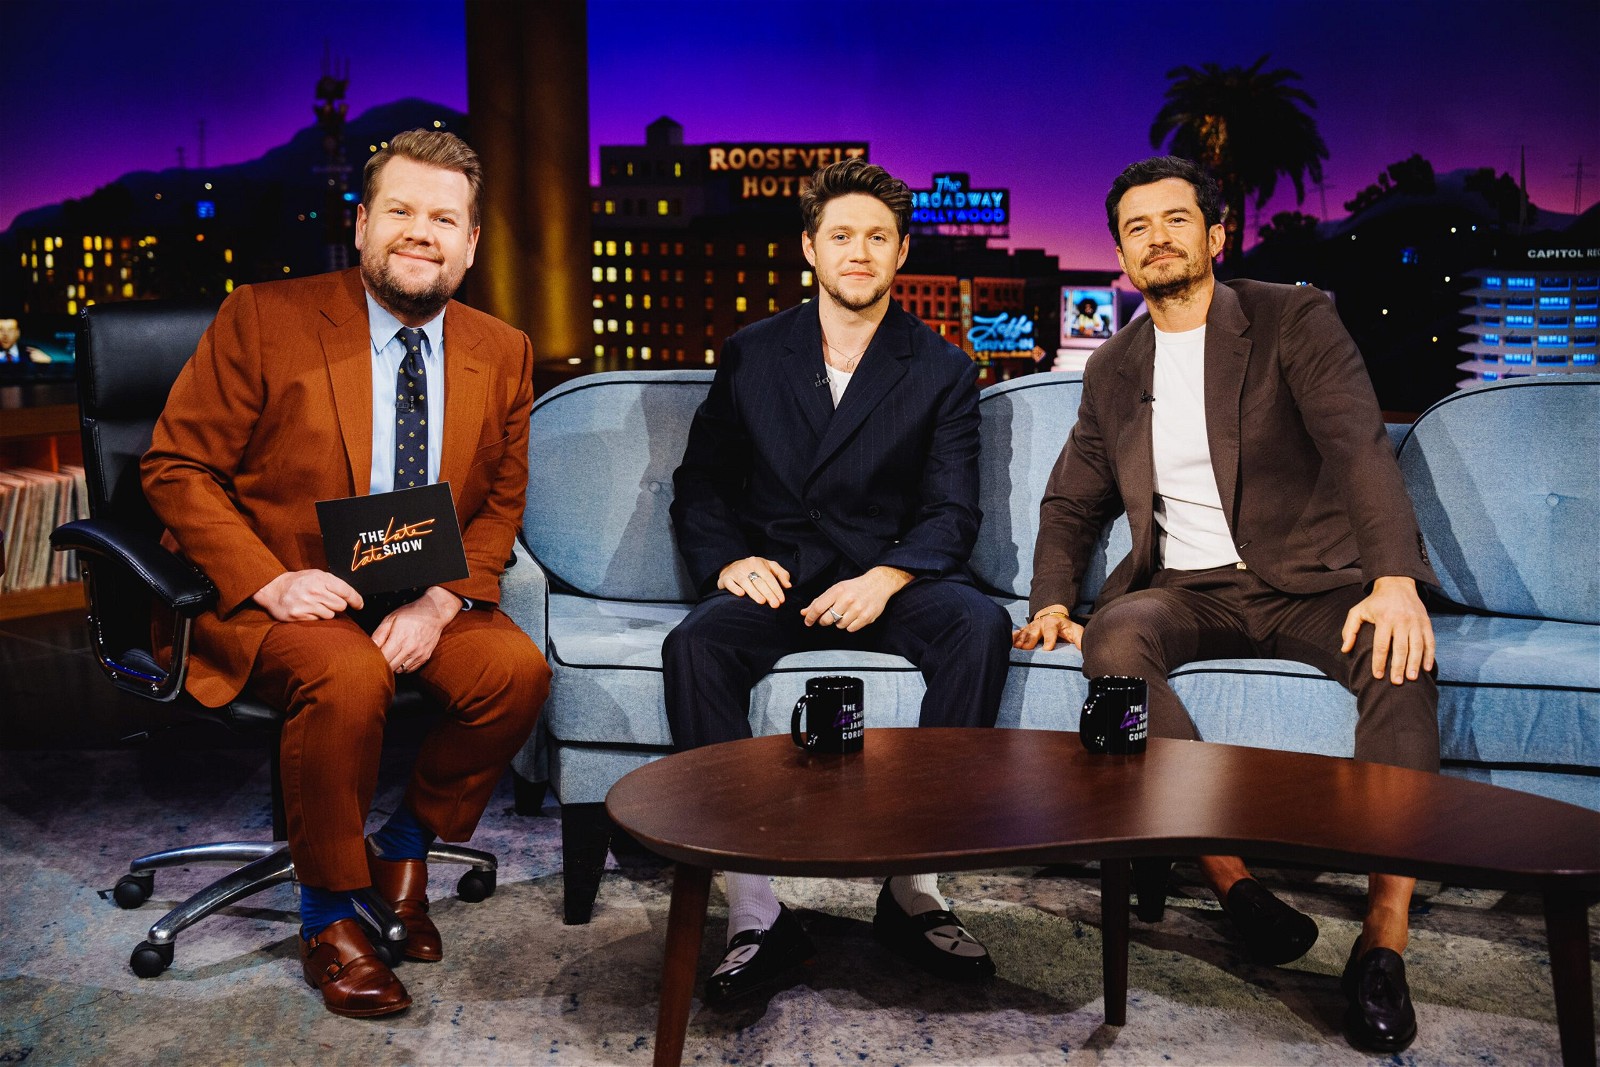 Orlando Bloom and Niall Horan on The Late Late Show with James Corden